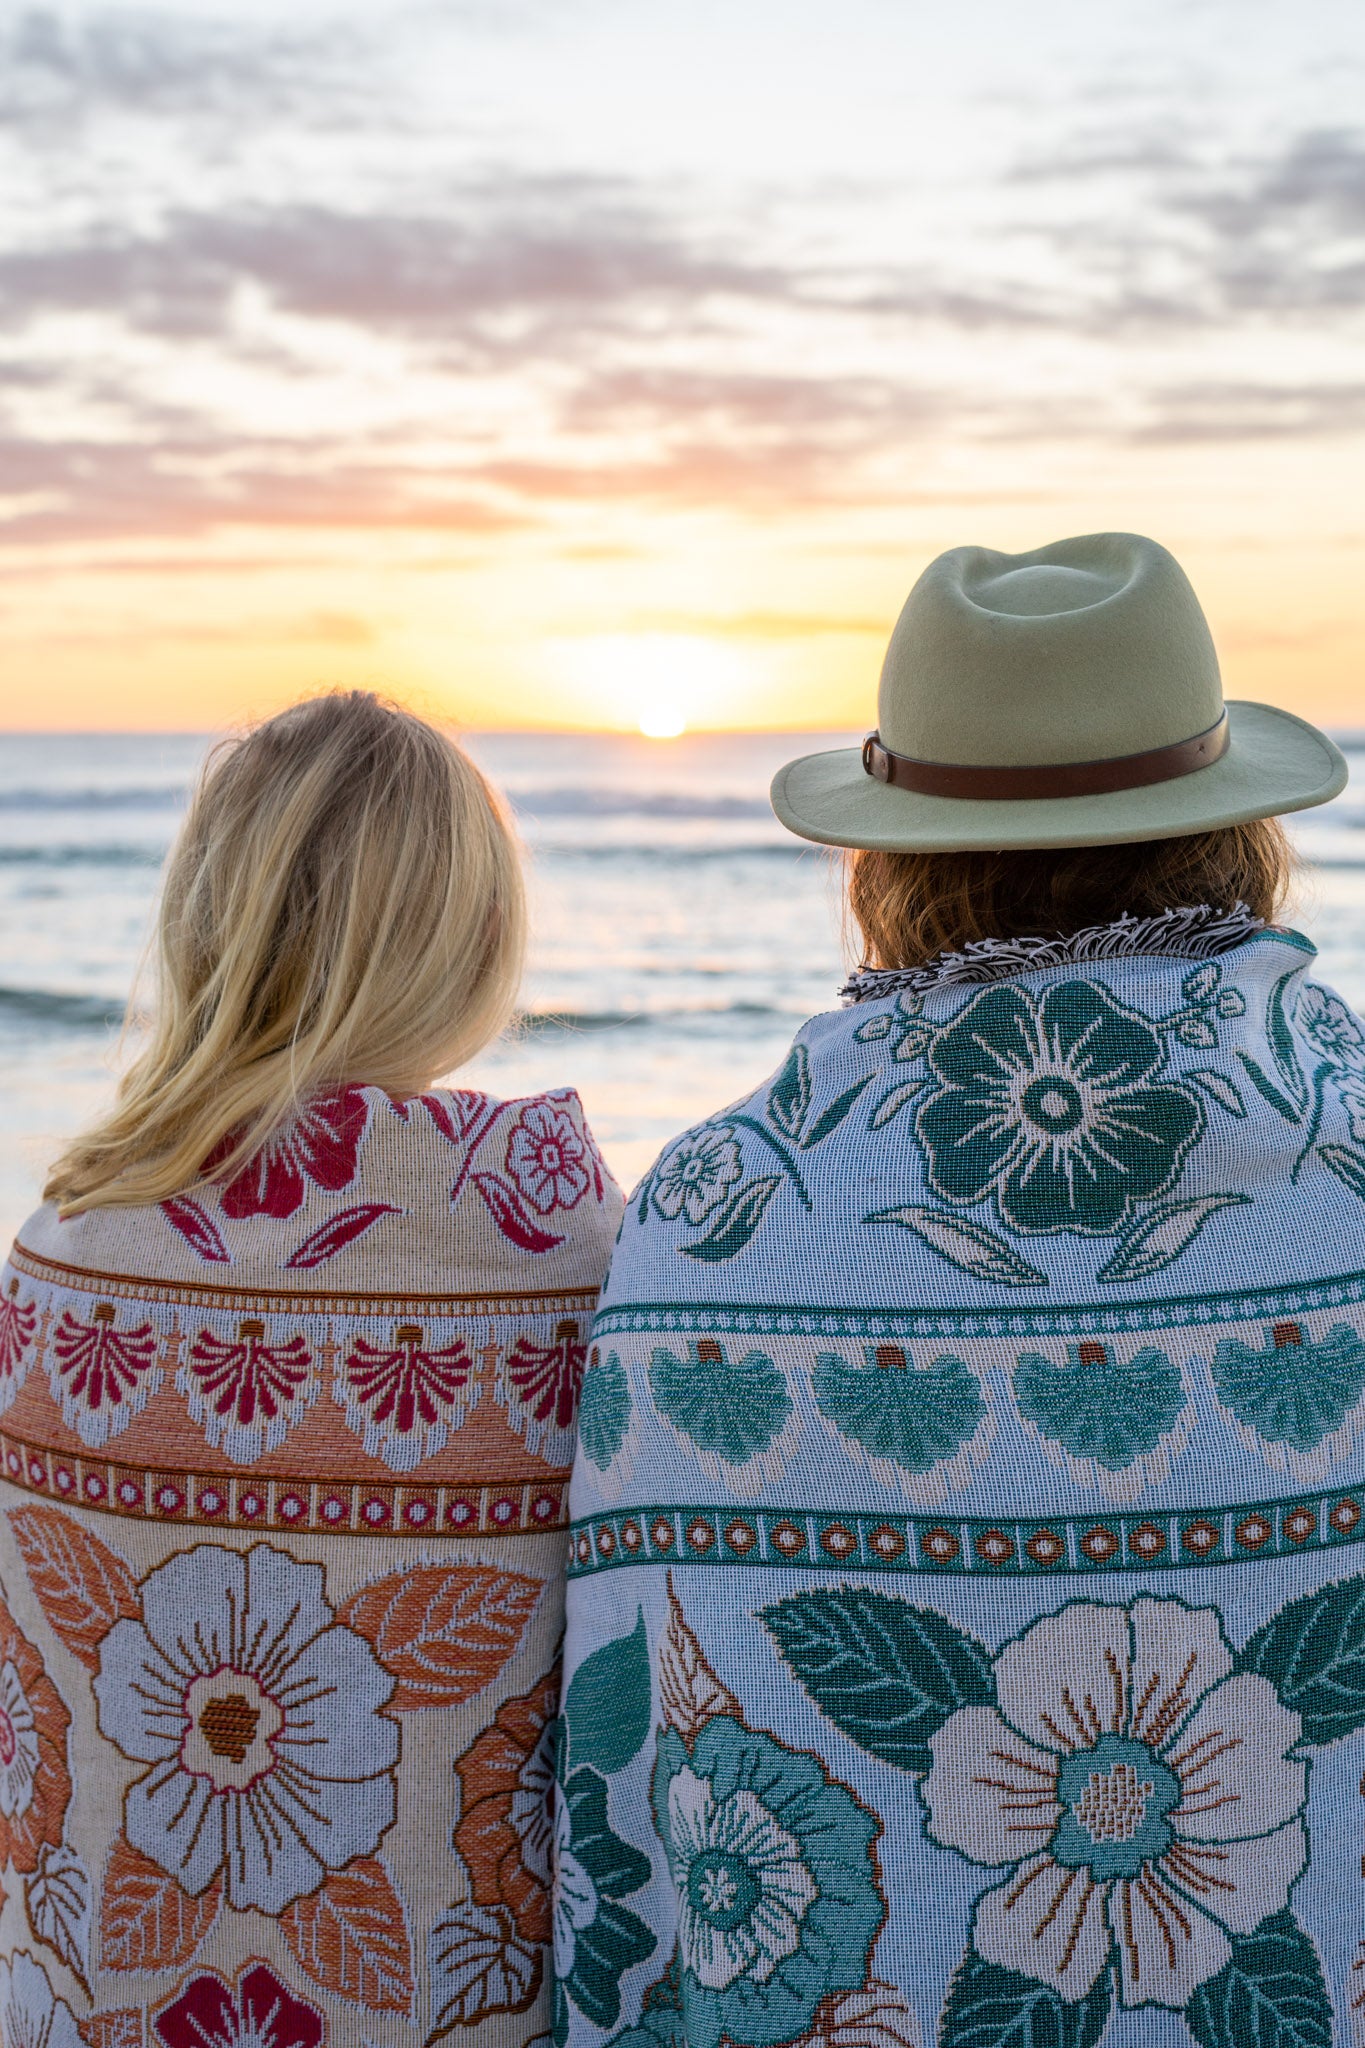 Girl & boy watching sunrise on beach with pink and green floral florence throw wrapped around her